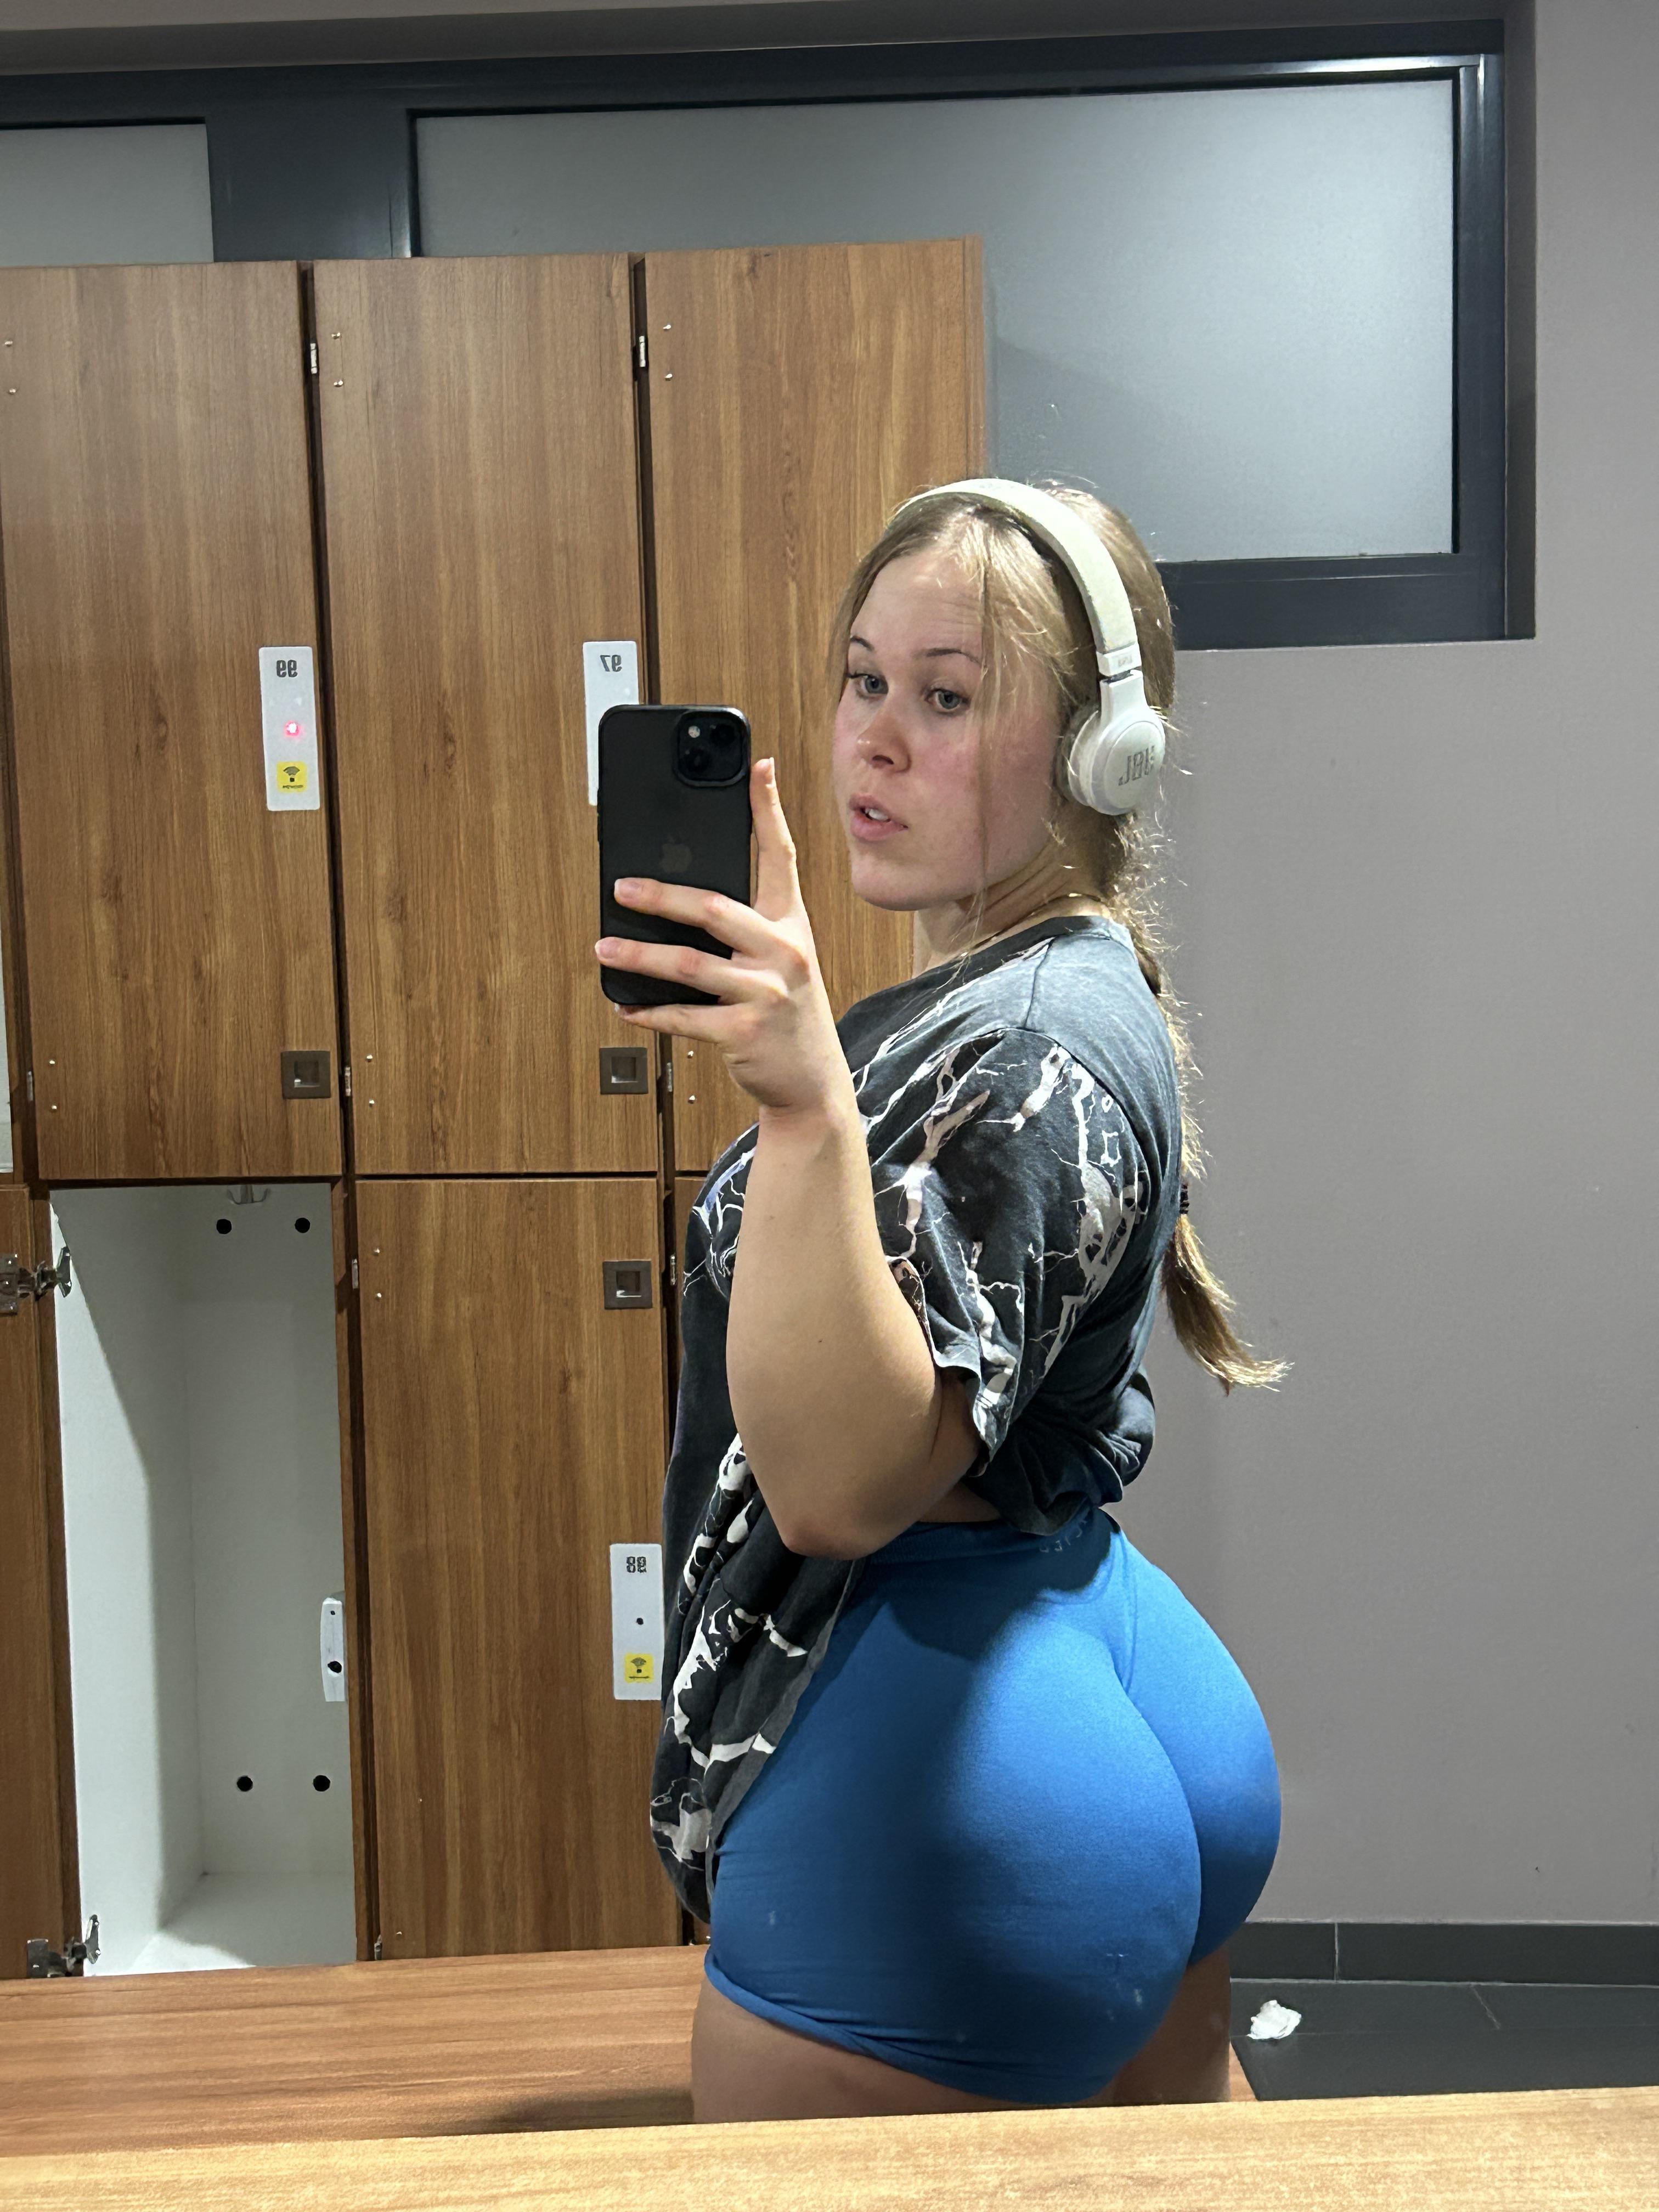 PAWG My goal this year is to get a 50inch